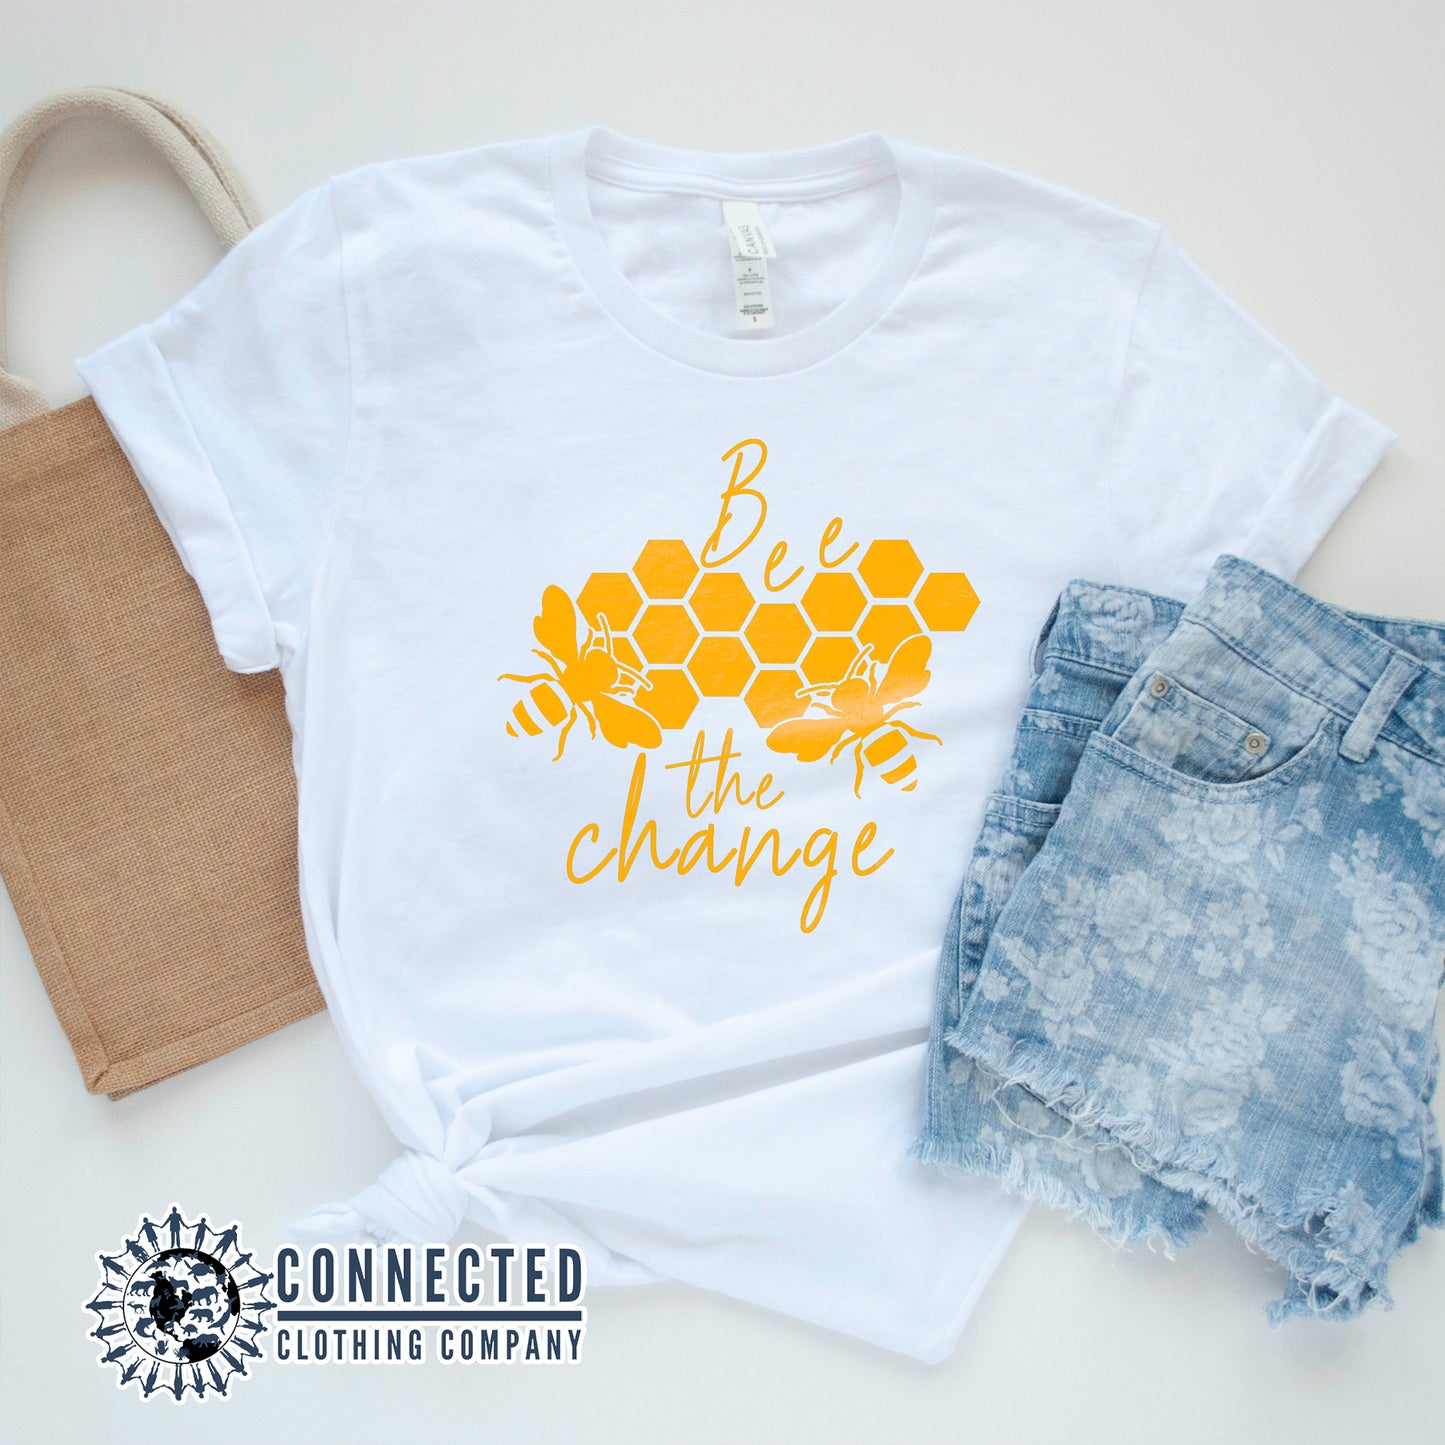 White Bee The Change Short-Sleeve Tee - Connected Clothing Company - 10% of profits donated to the Honeybee Conservancy